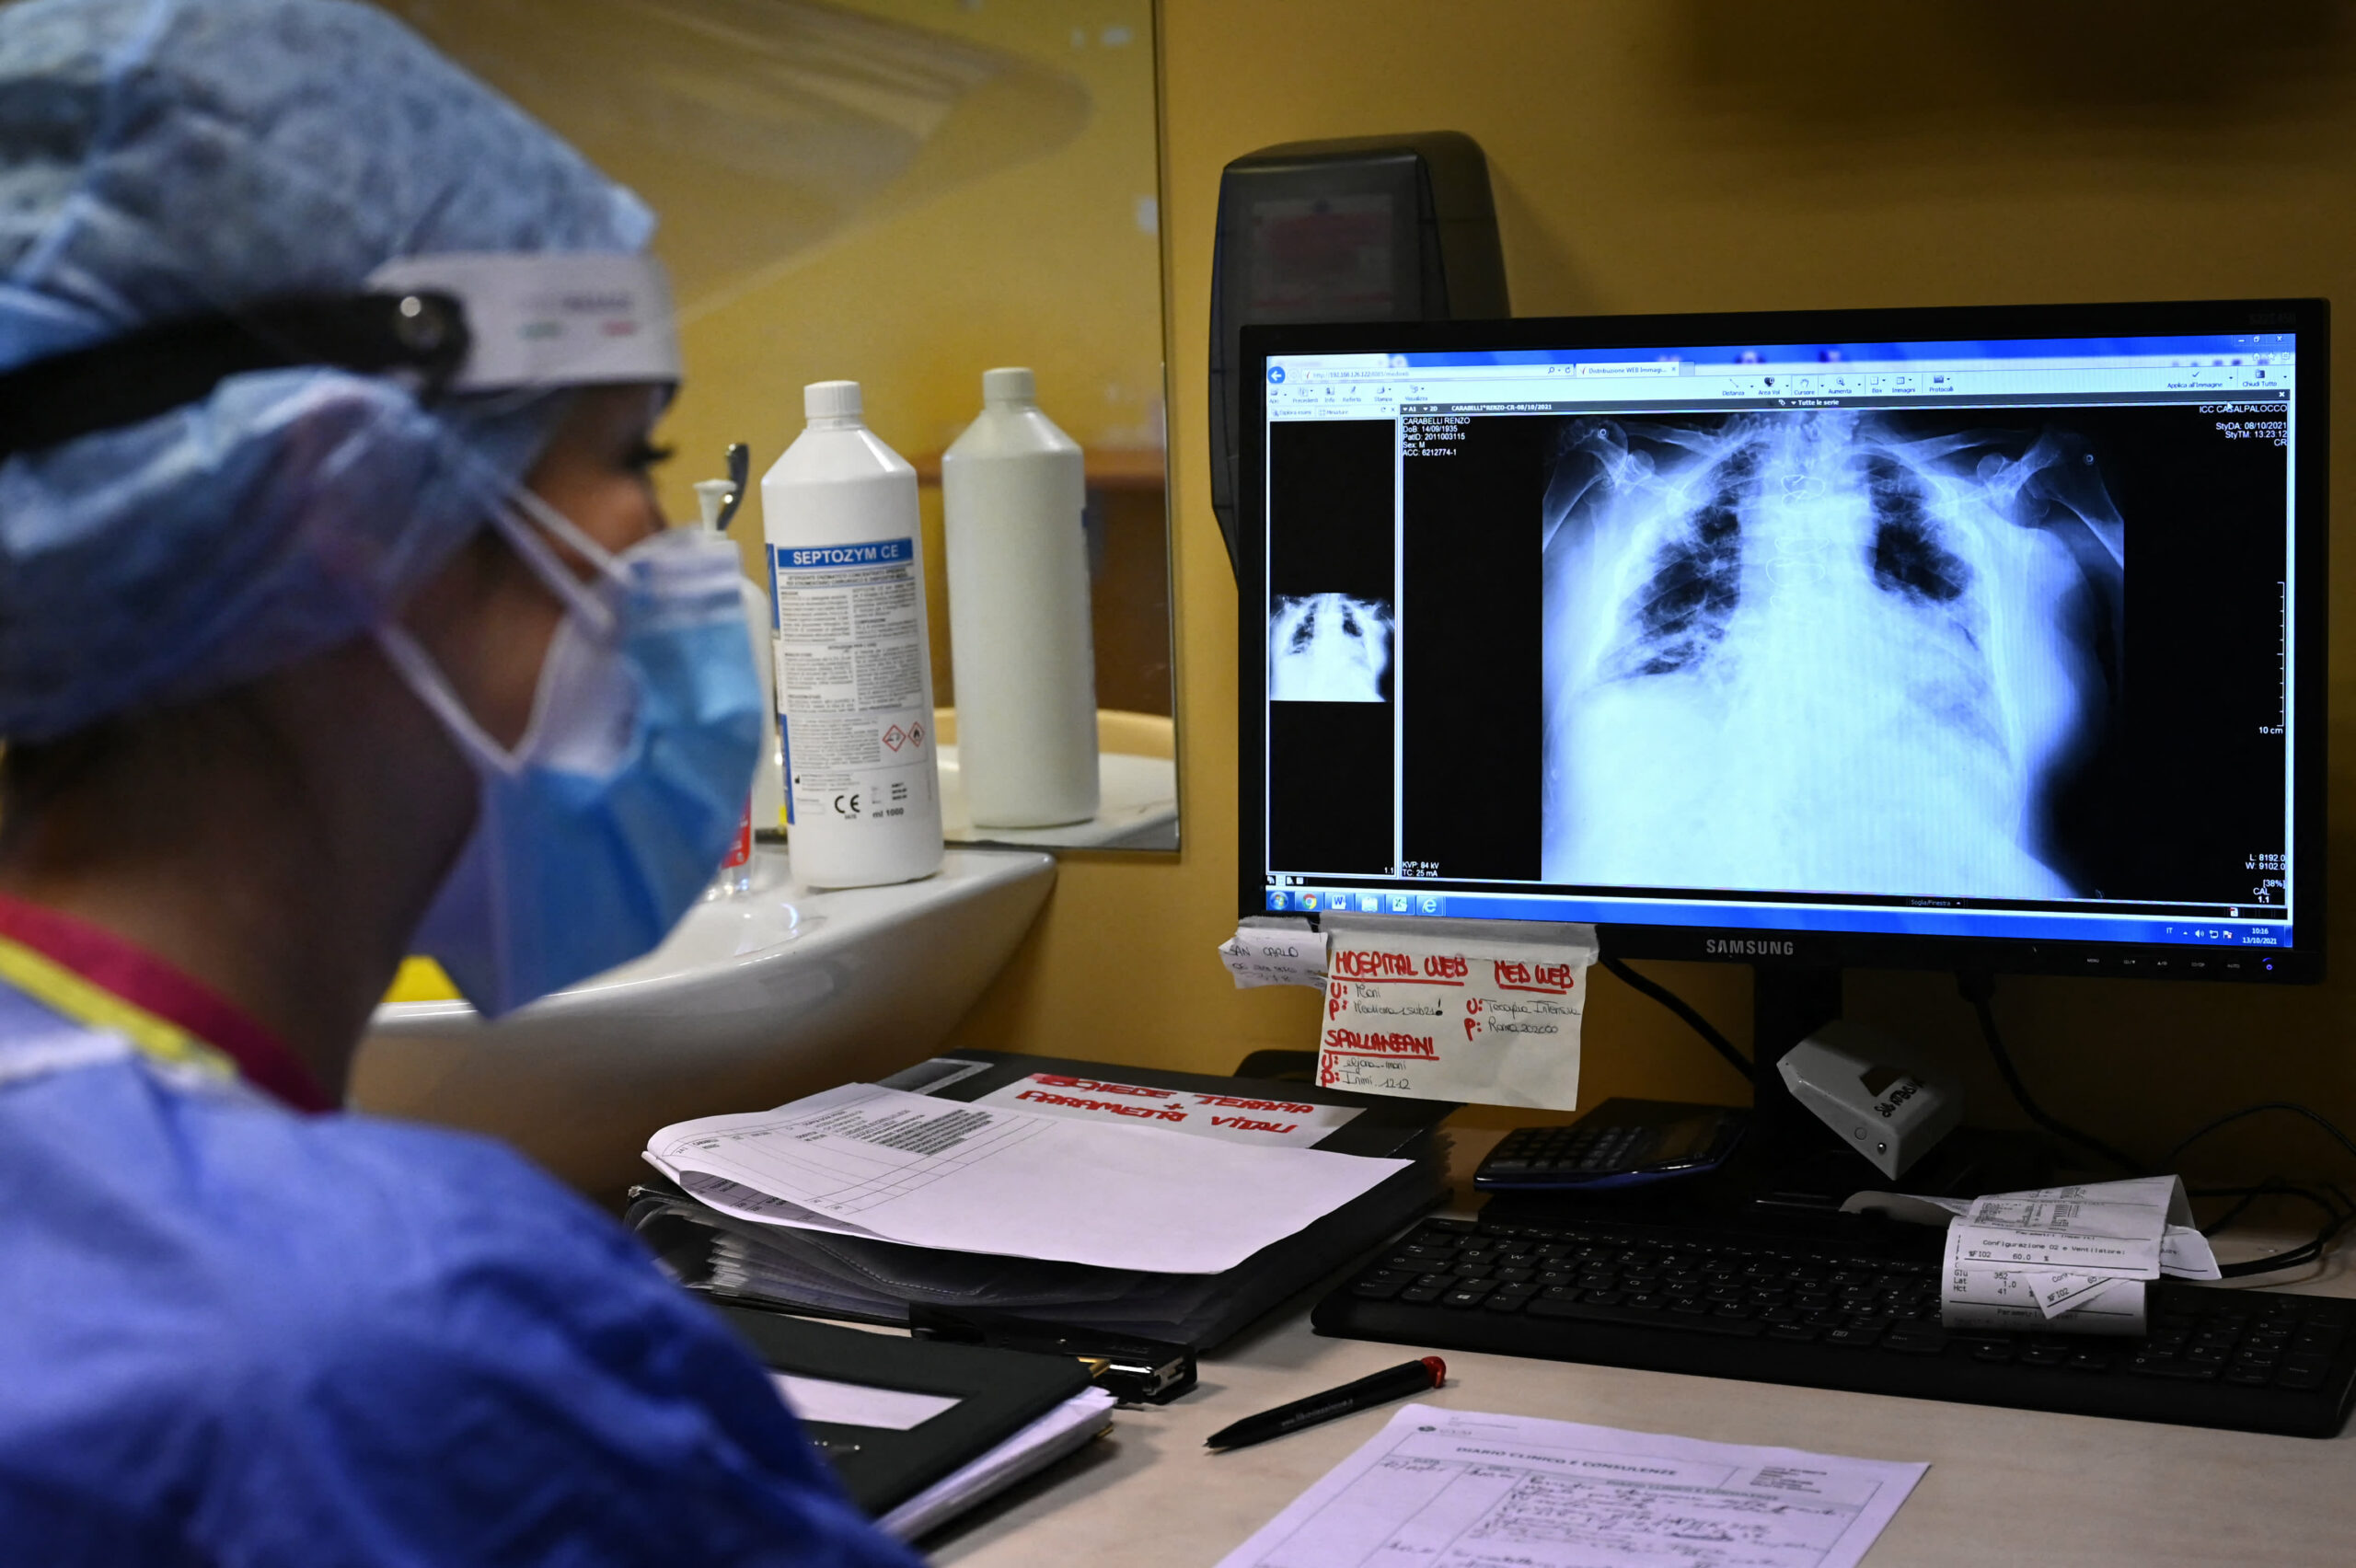 Omicron lung infection less severe, replicates faster than delta in human airways: Study